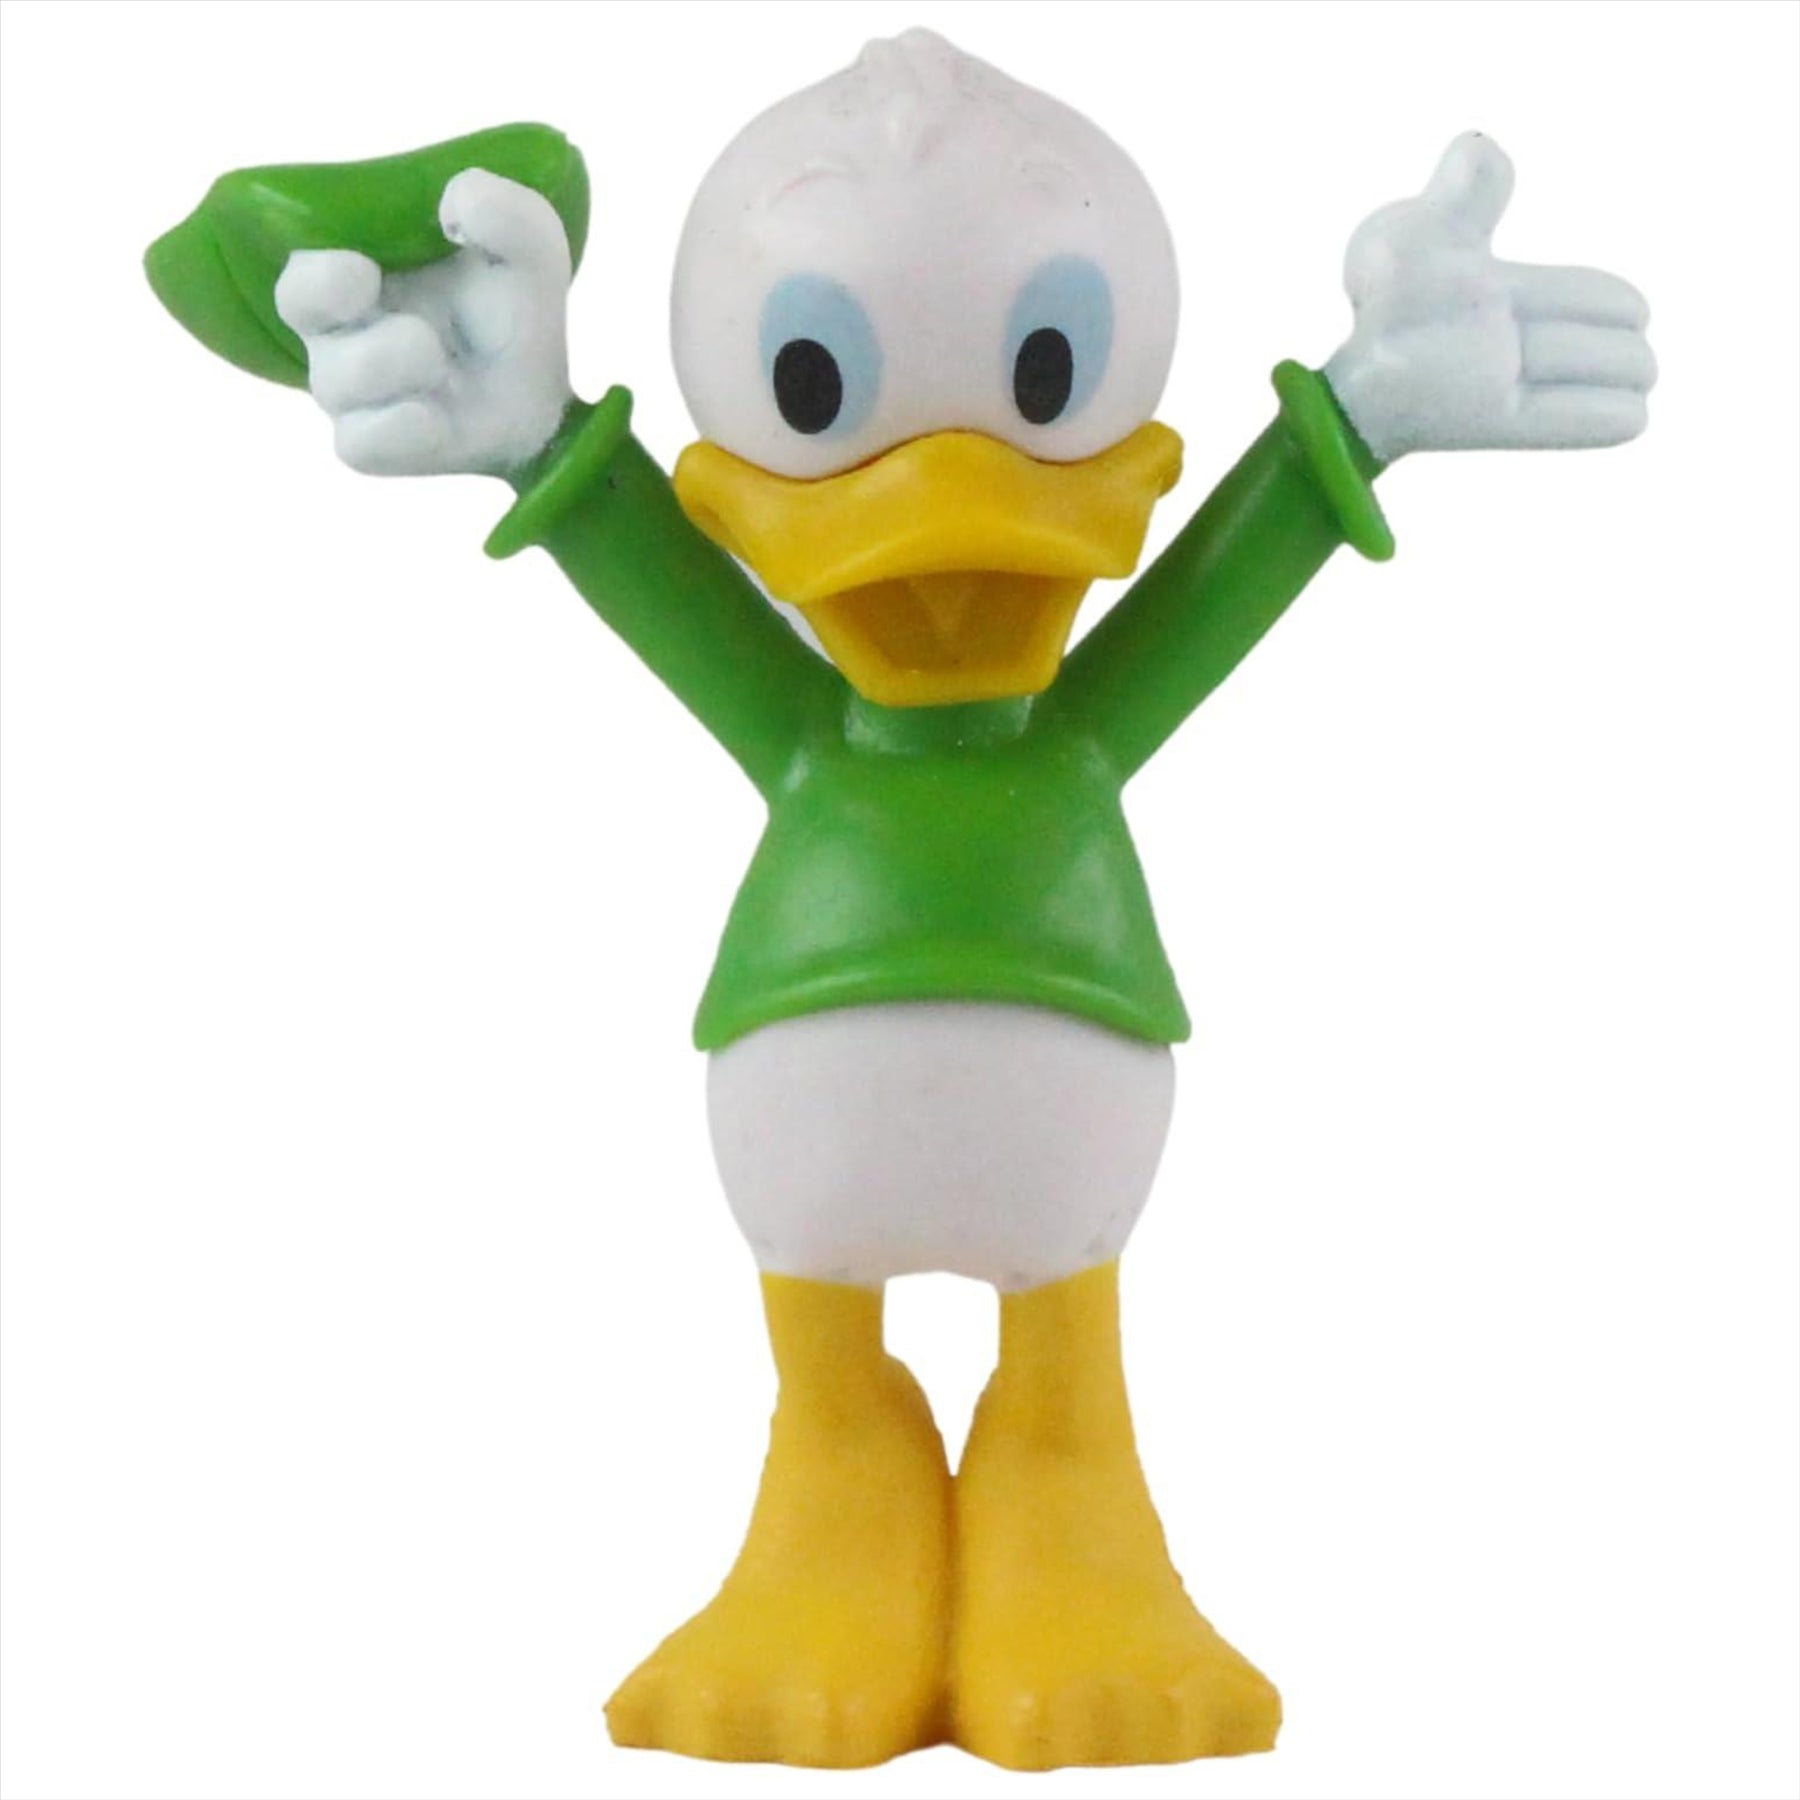 Mickey Mouse and Friends 3D Figures - Perfect Cake Toppers - 2" 5cm Huey, Dewey, Louie Mickey & 2.5" 6cm Scrooge McDuck - 5 Pack - Toptoys2u